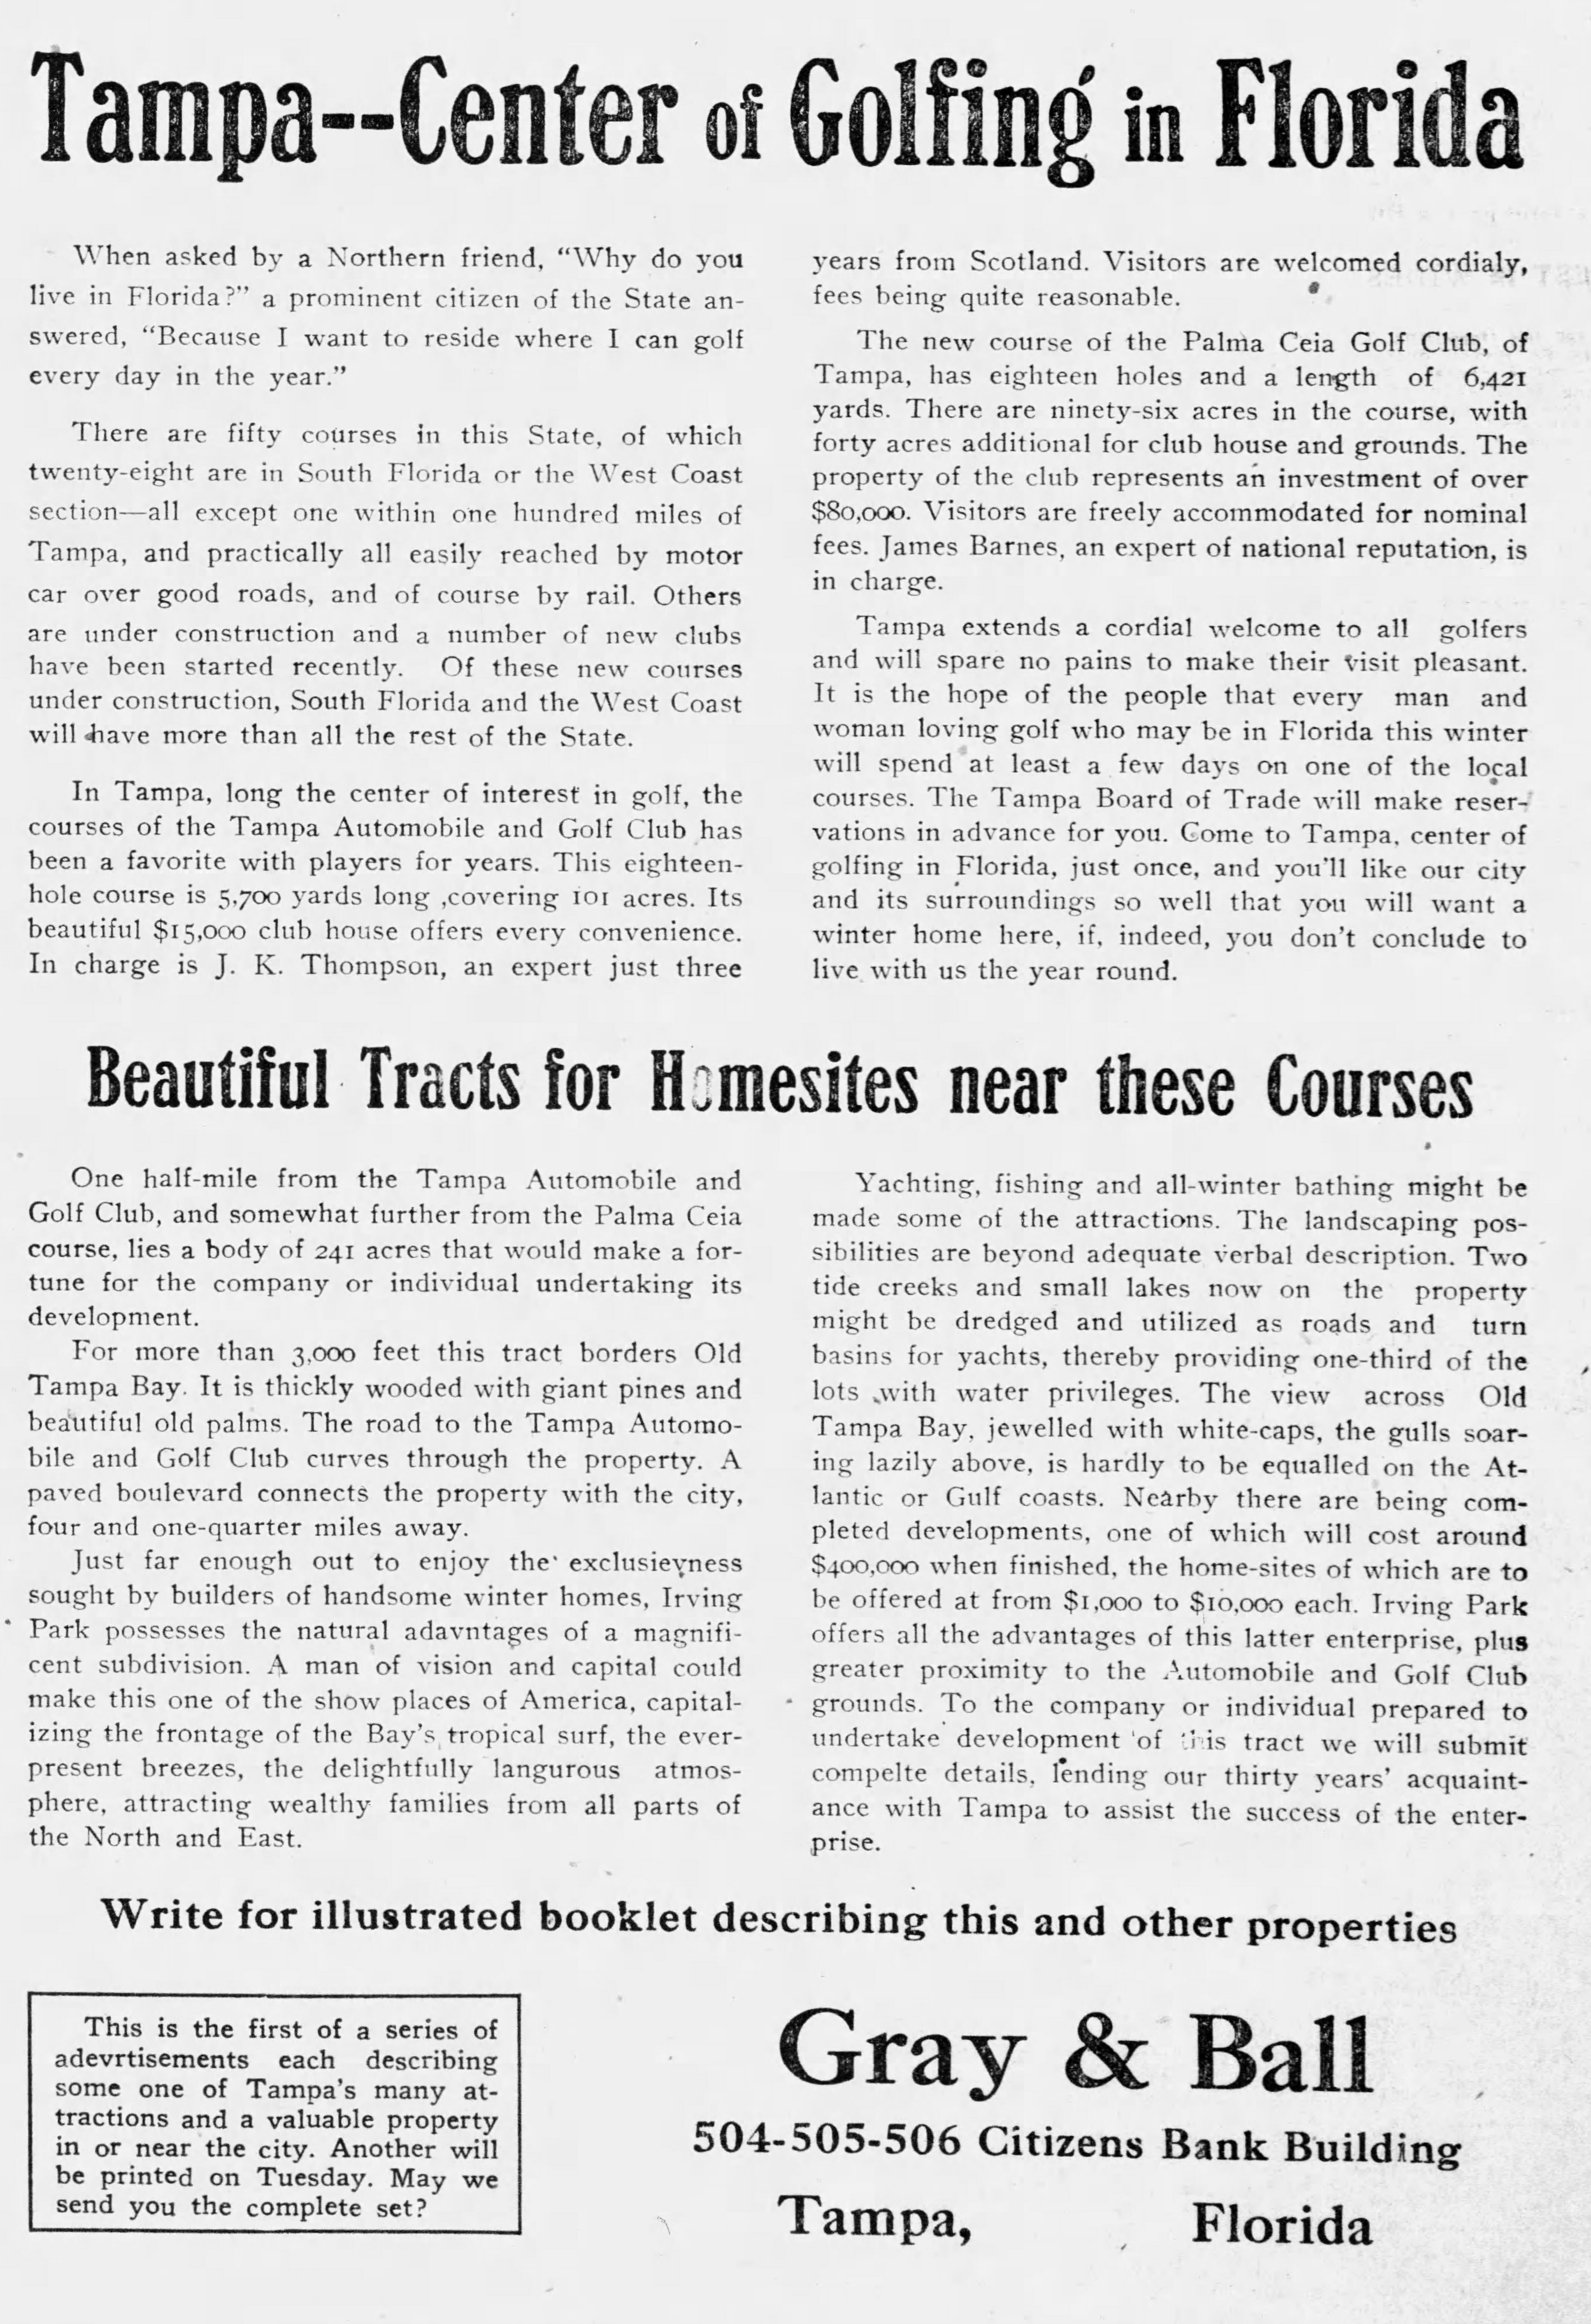 Beautiful Tracts for Homesites near these Courses - Feb 4, 1917 Tampa Tribune